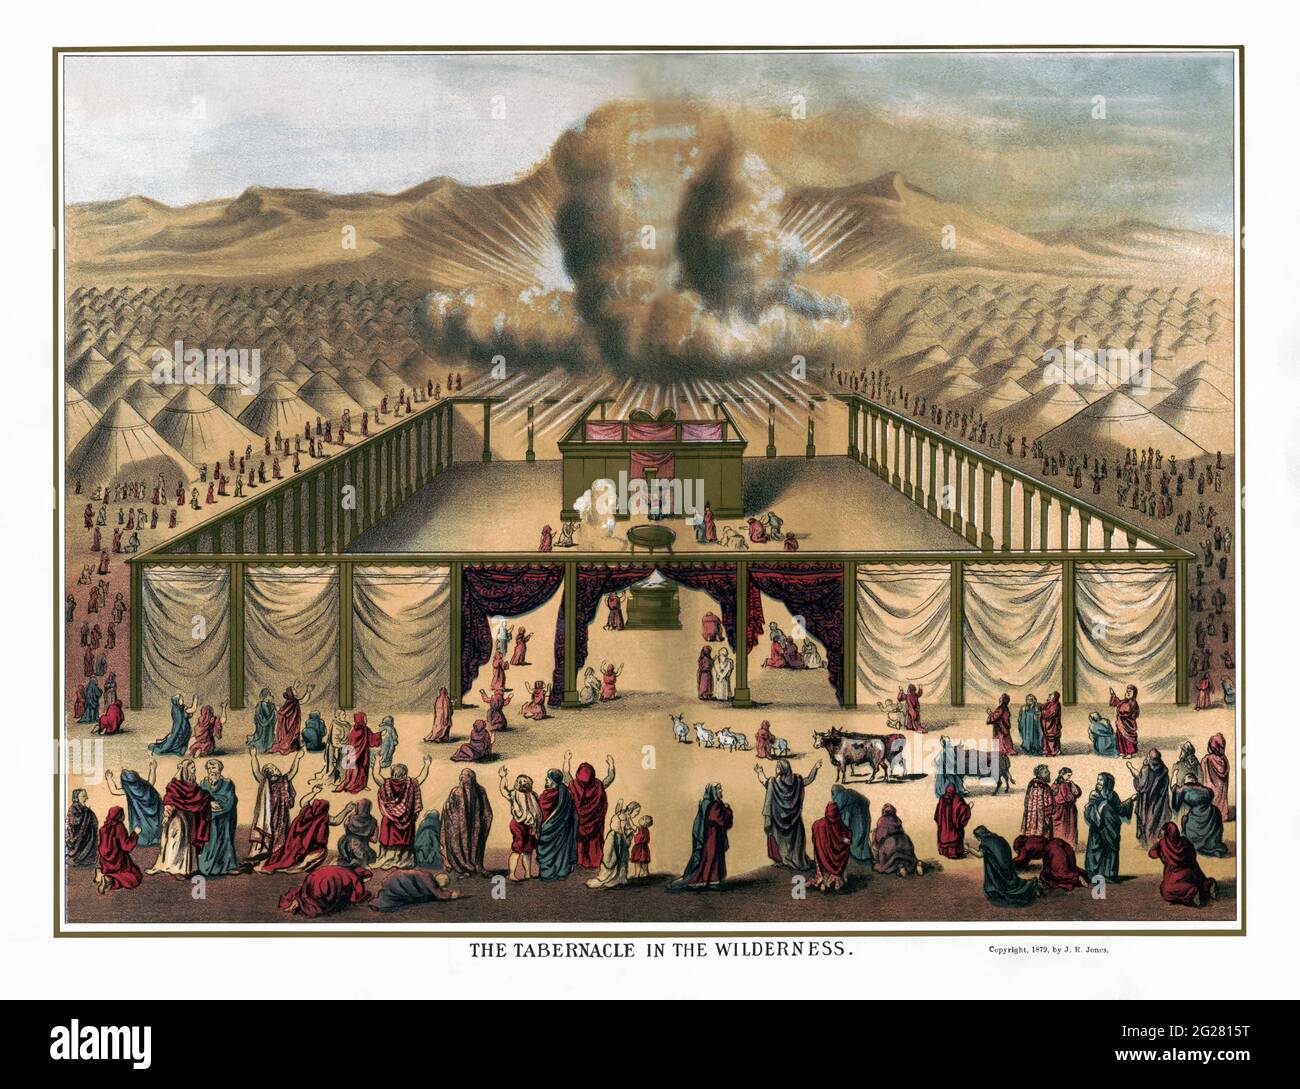 The tabernacle in the wilderness, from the Book of Exodus, the Old Testament. Stock Photo